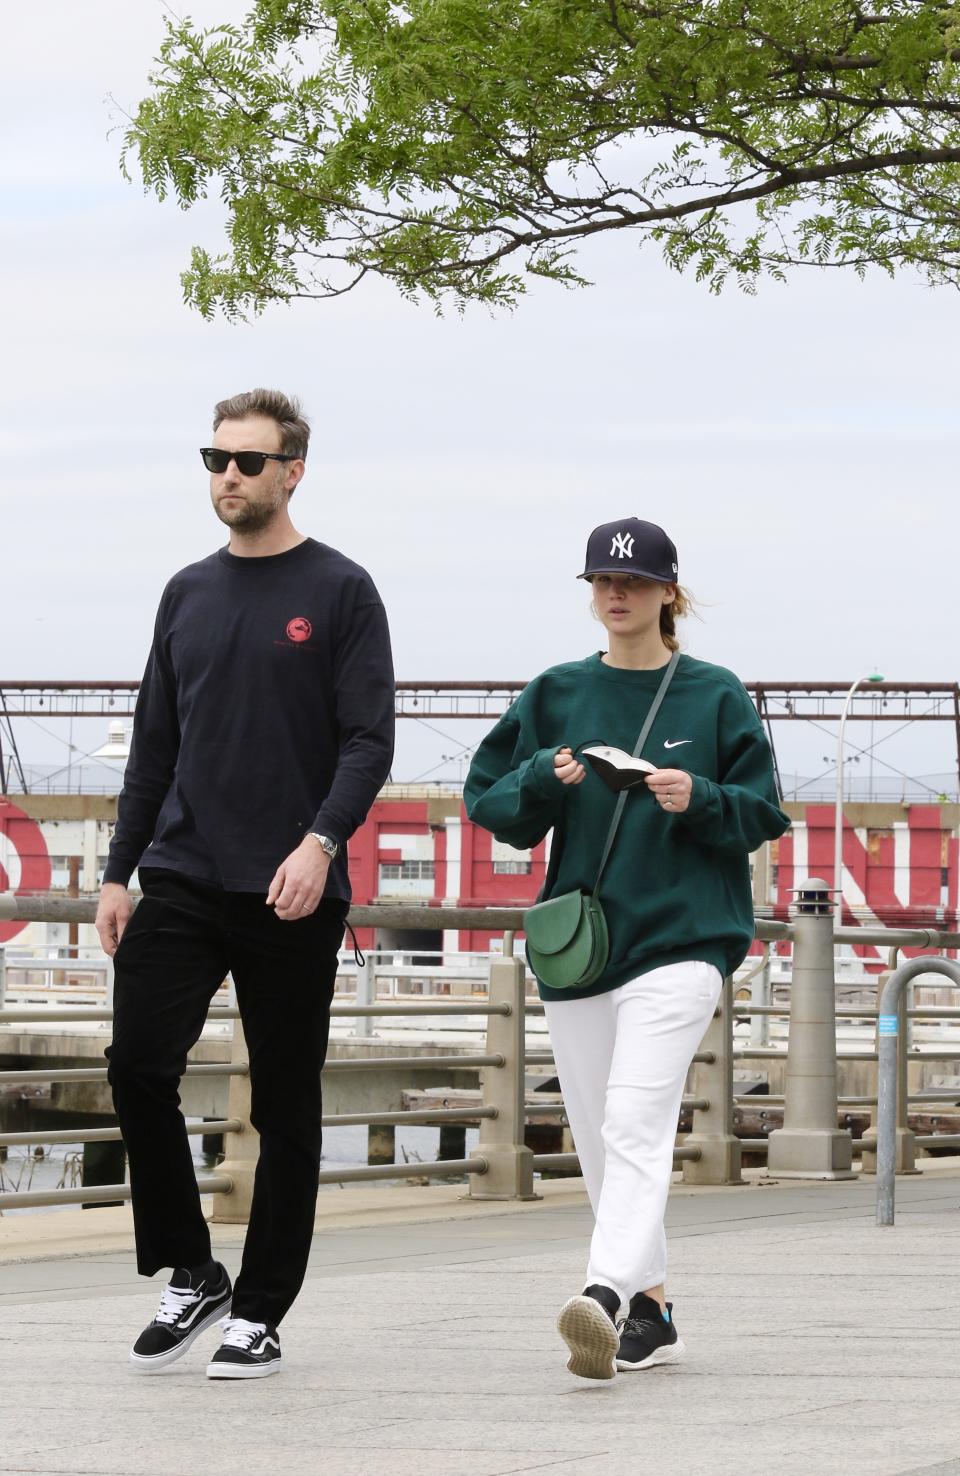 Jennifer Lawrence is seen out for a walk with husband, Cooke Maroney, by the Hudson River in NYC on May 24, 2021. (Photo: MEGA/GC Images)